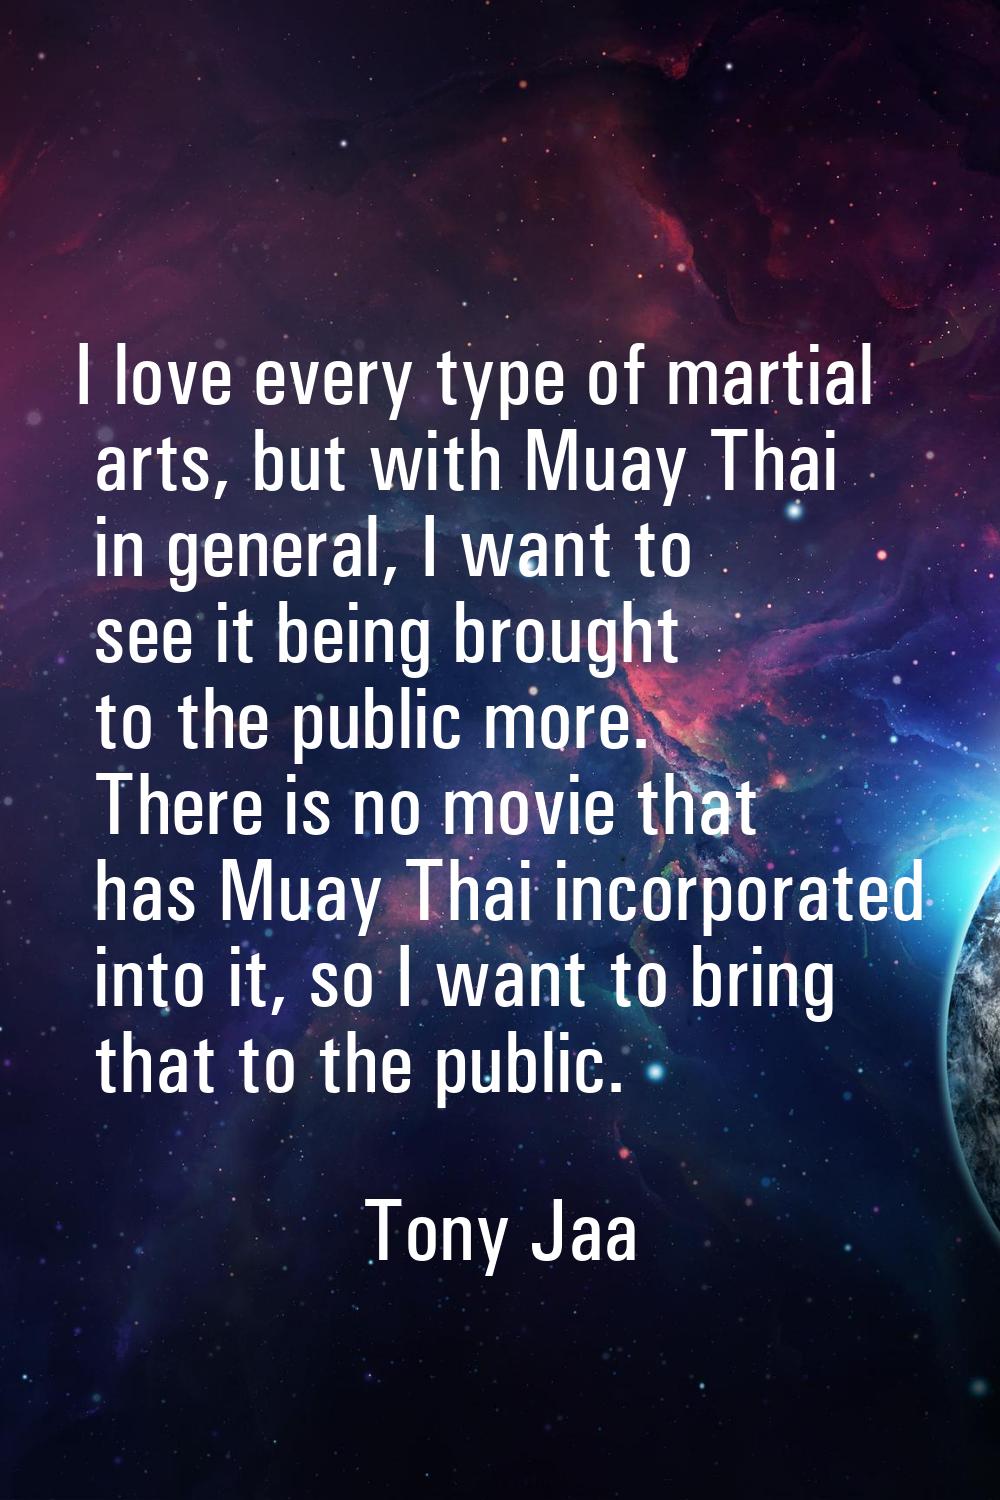 I love every type of martial arts, but with Muay Thai in general, I want to see it being brought to